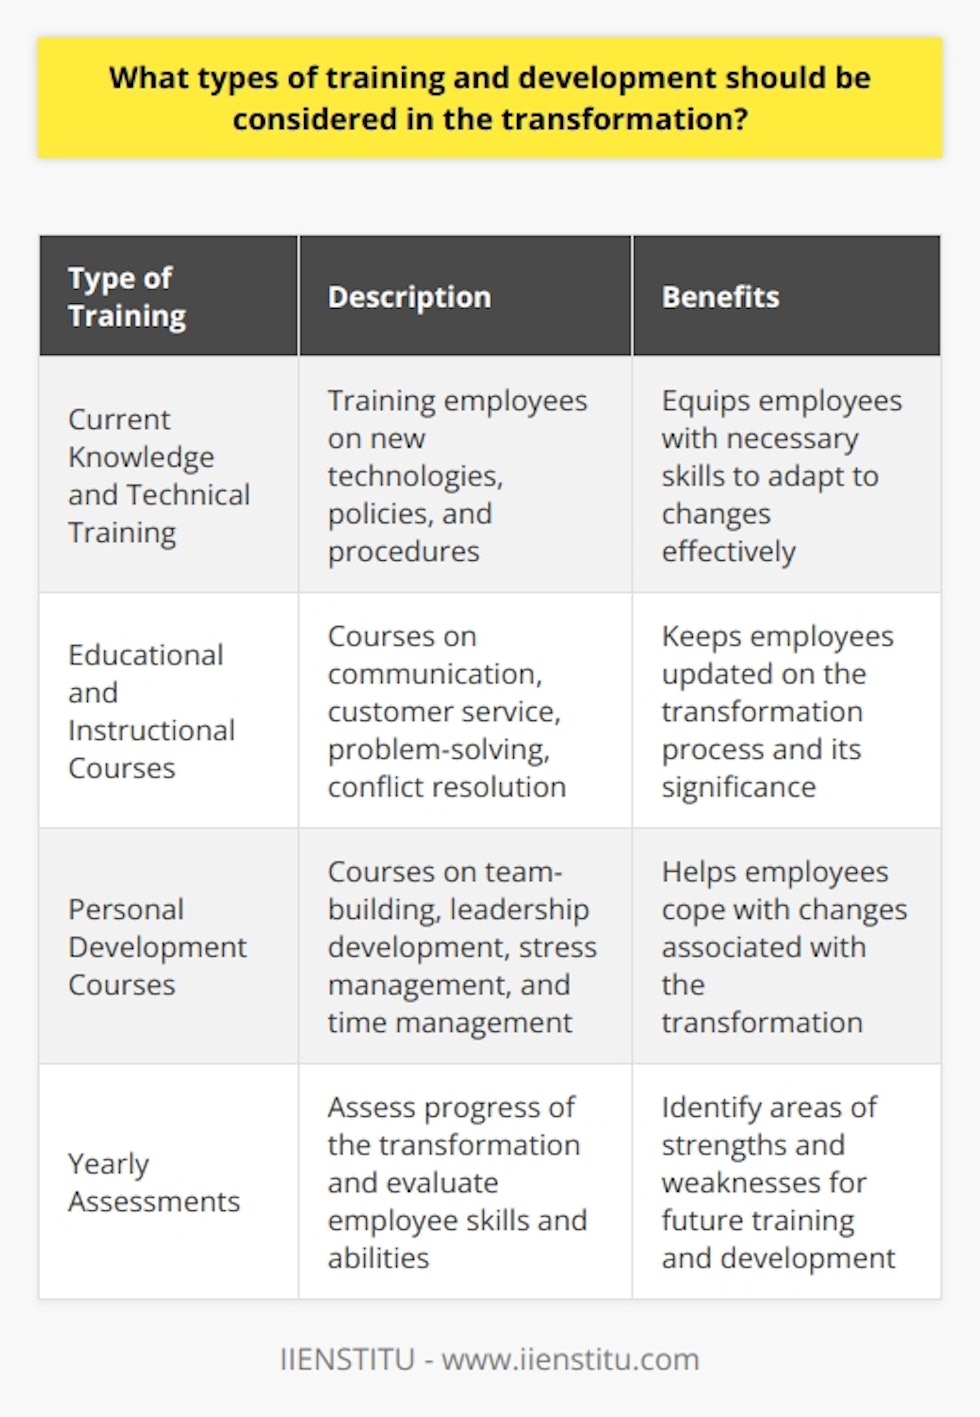 Corporate training and development play a crucial role in facilitating a successful transformation for organizations. When considering the types of training and development to implement, it is important to assess the extent of the change as well as the specific requirements of the organization. By doing so, organizations can ensure that their employees are equipped with the necessary skills and knowledge to adapt to the changes effectively.One type of training that should be considered is current knowledge and technical training. This involves providing employees with the necessary training to adapt to new technologies, policies, and procedures. It is vital for employees to be trained on the latest systems, processes, and tools. Additionally, organizational leadership should ensure that employees understand the goals and objectives of the transformation. Technical skills such as software proficiency and IT security may also be critical, as they could be essential for employees to carry out their tasks effectively.In addition to technical training, organizations should also consider offering educational and instructional courses. These courses can be purchased or developed based on the organization's specific needs. Examples of topics that may be covered include communication, customer service, problem-solving, and conflict resolution. These courses can help keep employees updated on the transformation process and make them understand the significance of the changes taking place within the organization.Another important aspect to consider is providing personal development courses. These courses are designed to help employees develop the skills necessary to cope with the changes associated with the transformation. For instance, team-building, leadership development, stress management, and time management courses can be valuable in enabling employees to navigate through the transformation successfully.Lastly, organizations should also implement yearly assessments to review the progress of the transformation and evaluate the skills and abilities of employees. These assessments provide an opportunity to identify areas of strengths and weaknesses among employees. By gathering this data, organizations can gain insights for future training and development efforts.To ensure a successful transformation, organizations should consider all types of training and development. It is essential to tailor these programs to meet the specific needs of the organization and its employees. By conducting a thorough evaluation and implementing appropriate training and development initiatives, organizations can increase their chances of achieving a successful transformation.